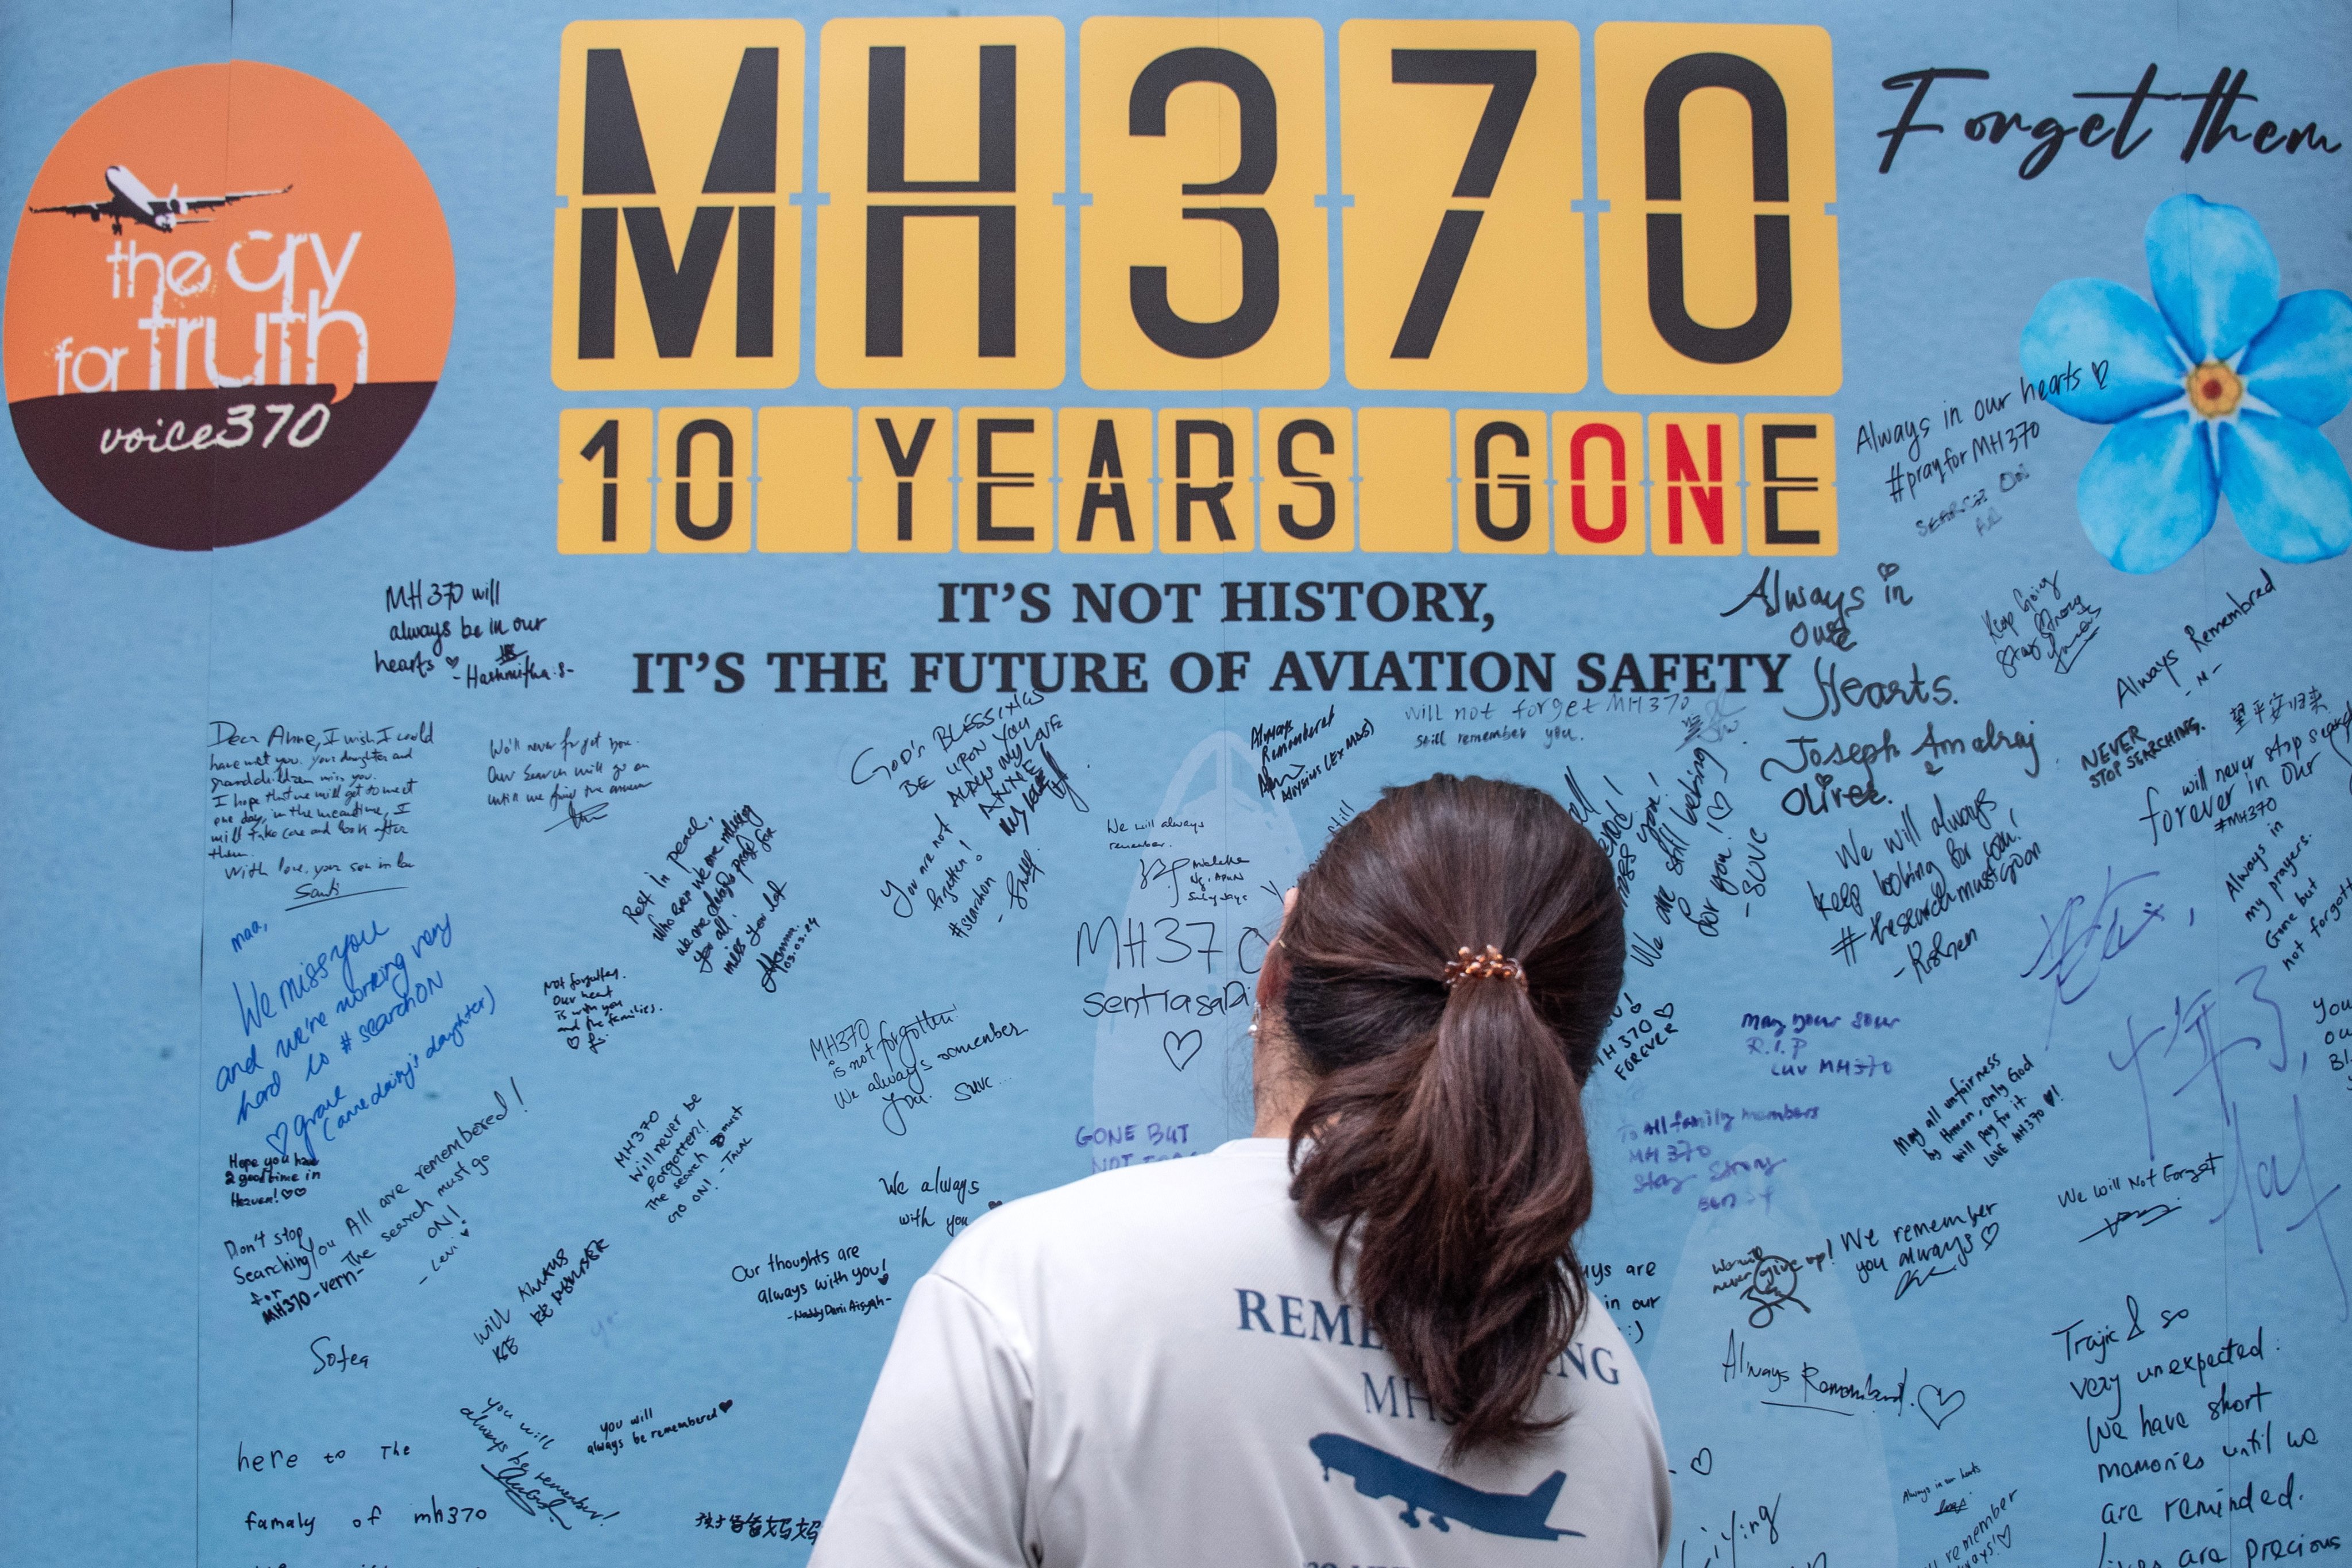 A family member of passengers and crew on board the missing Malaysian Airlines flight MH370 writes on a memorial wall during a remembrance event marking the 10th anniversary of its disappearance in Selangor, Malaysia, on March 3. Photo: EPA-EFE